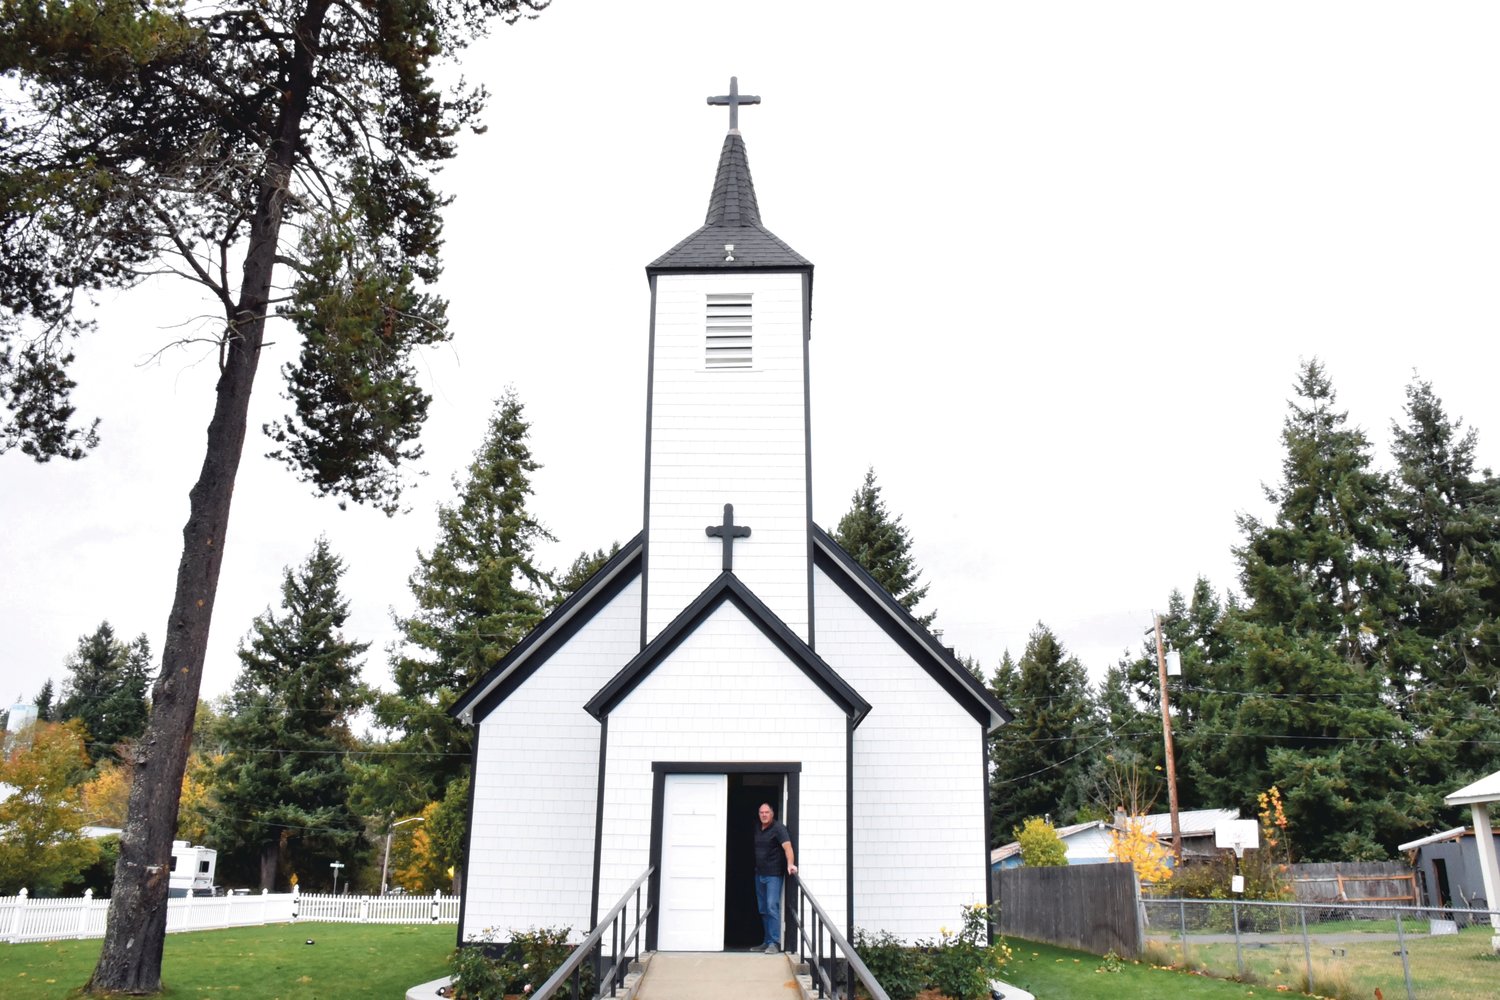 The Rainier Historical Zion Church, located at 209 Olympia St., received its long-sought-after exterior lighting two weeks ago, along with indoor surveillance cameras. Rose gardens were also planted this summer..